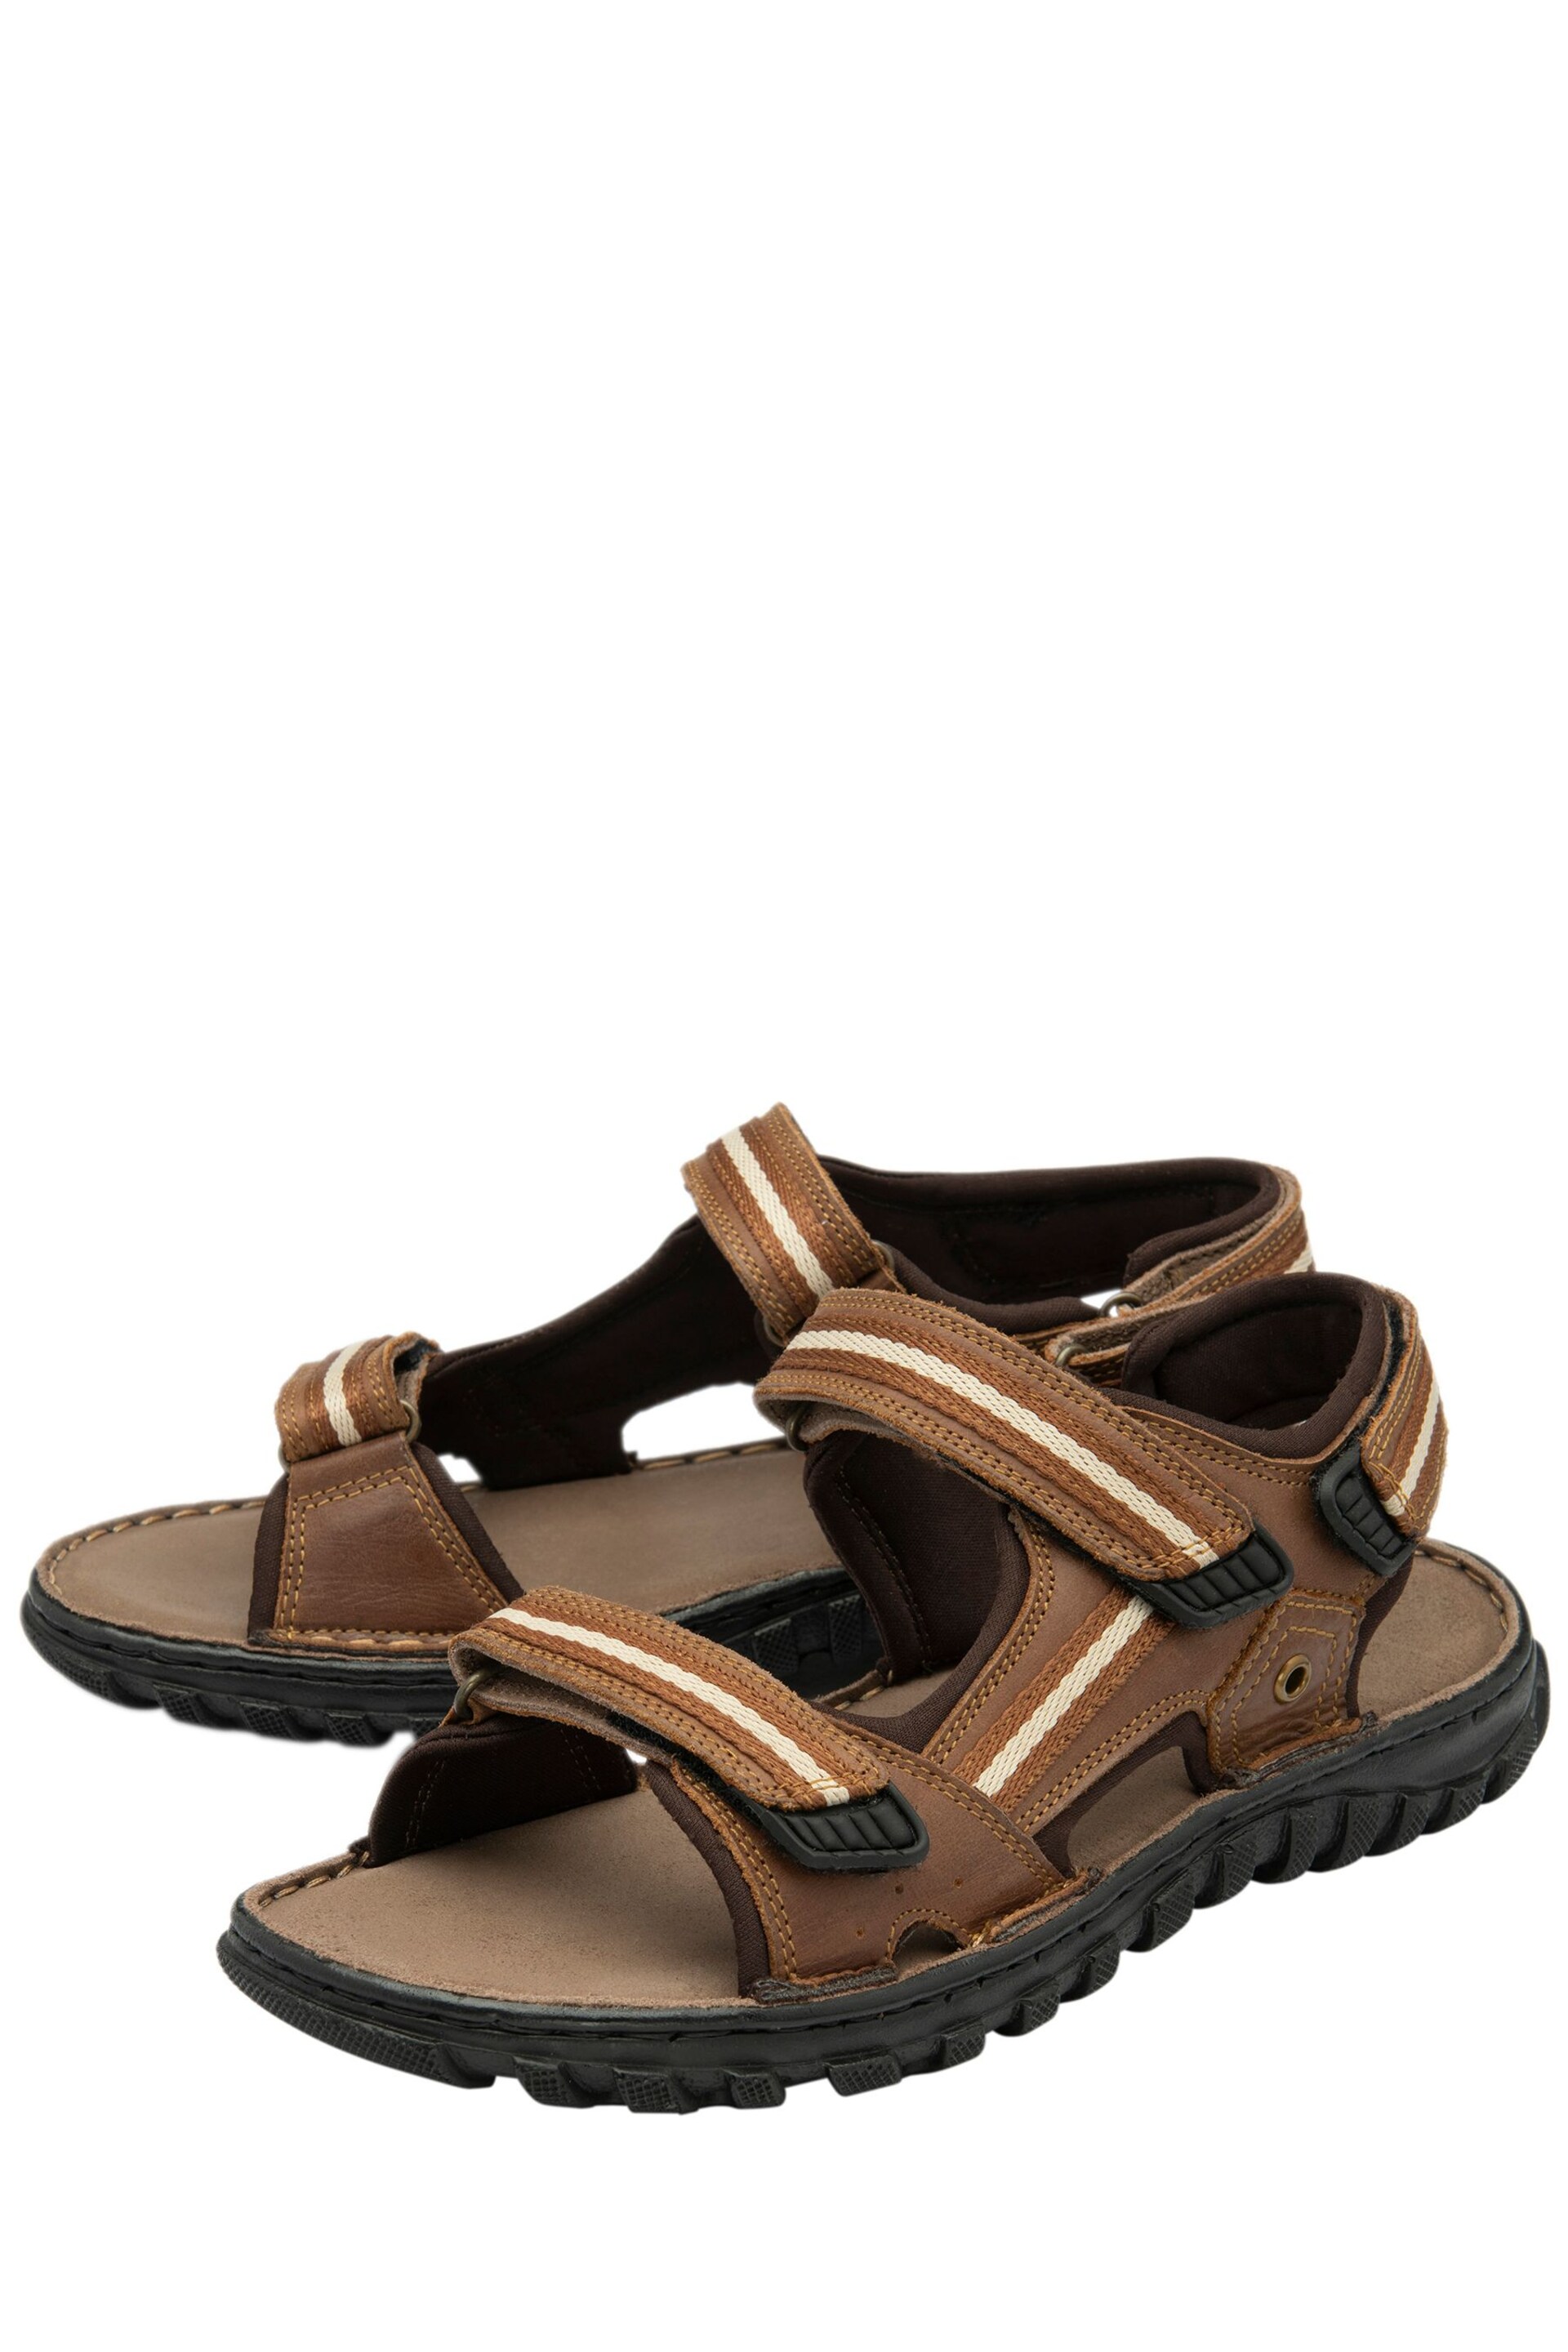 Lotus Brown Leather Open-Toe Sandals - Image 2 of 4